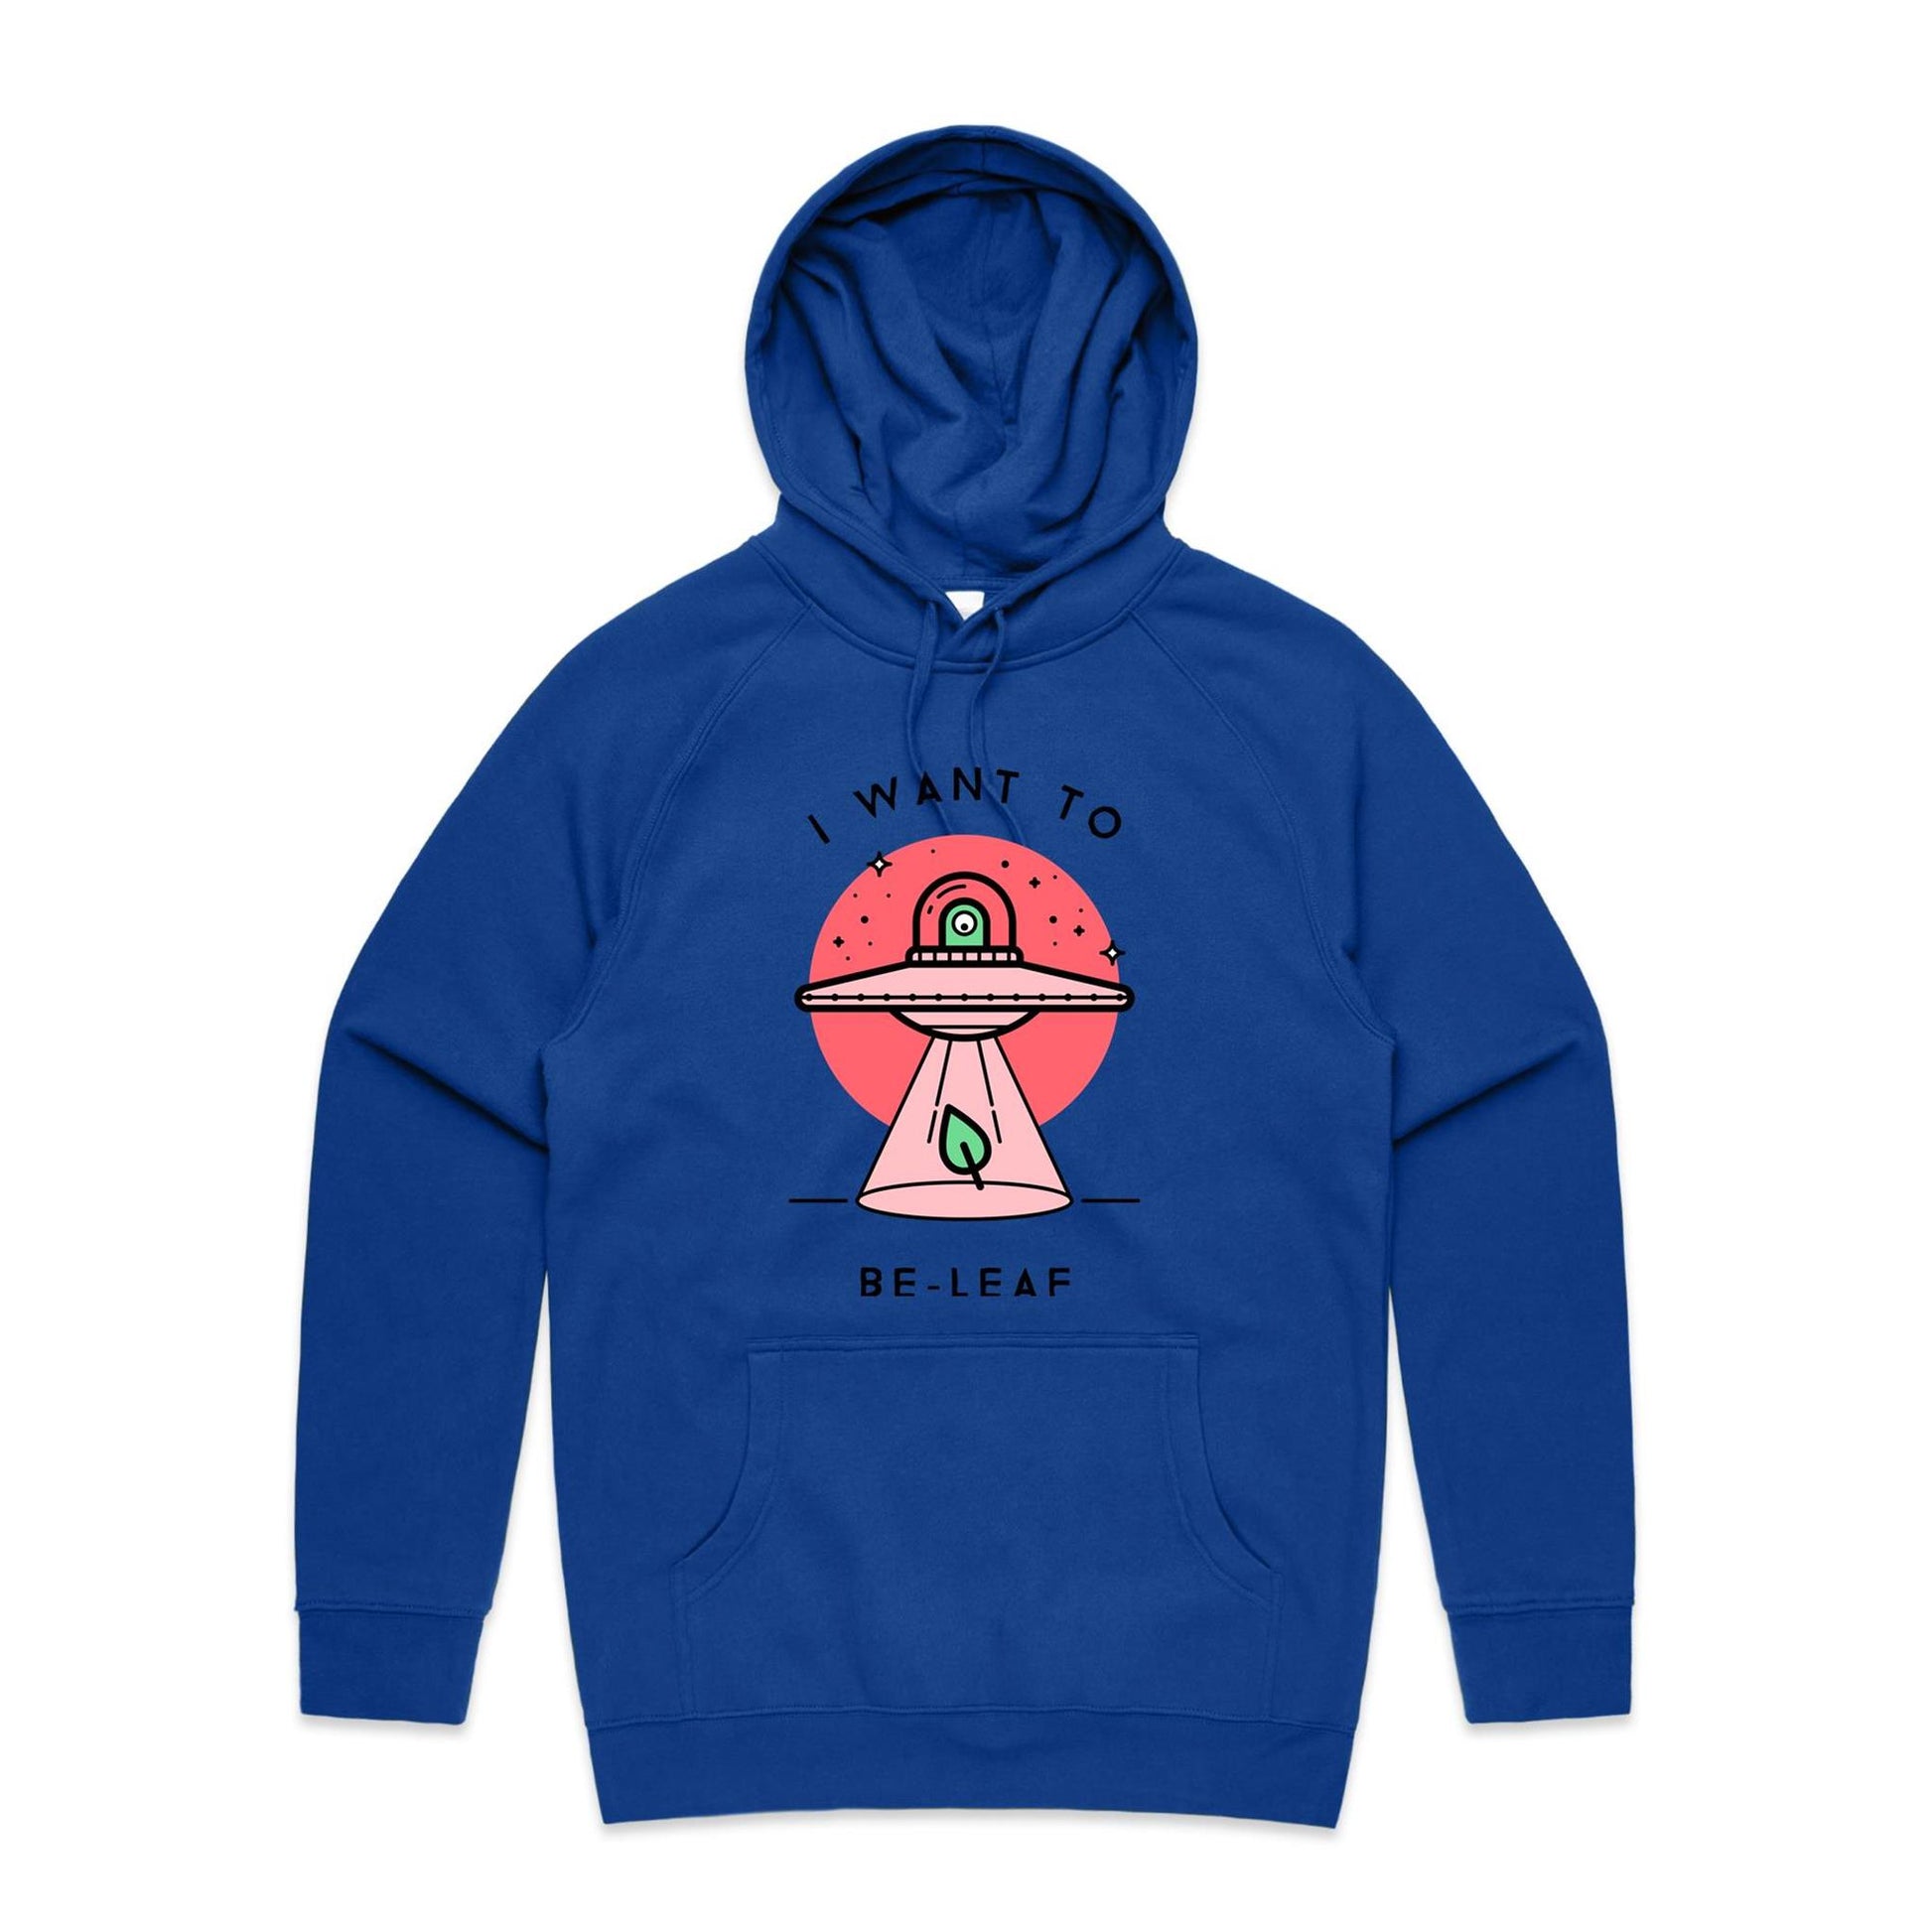 I Want To Be-Leaf (Beleive) - Supply Hood Bright Royal Mens Supply Hoodie